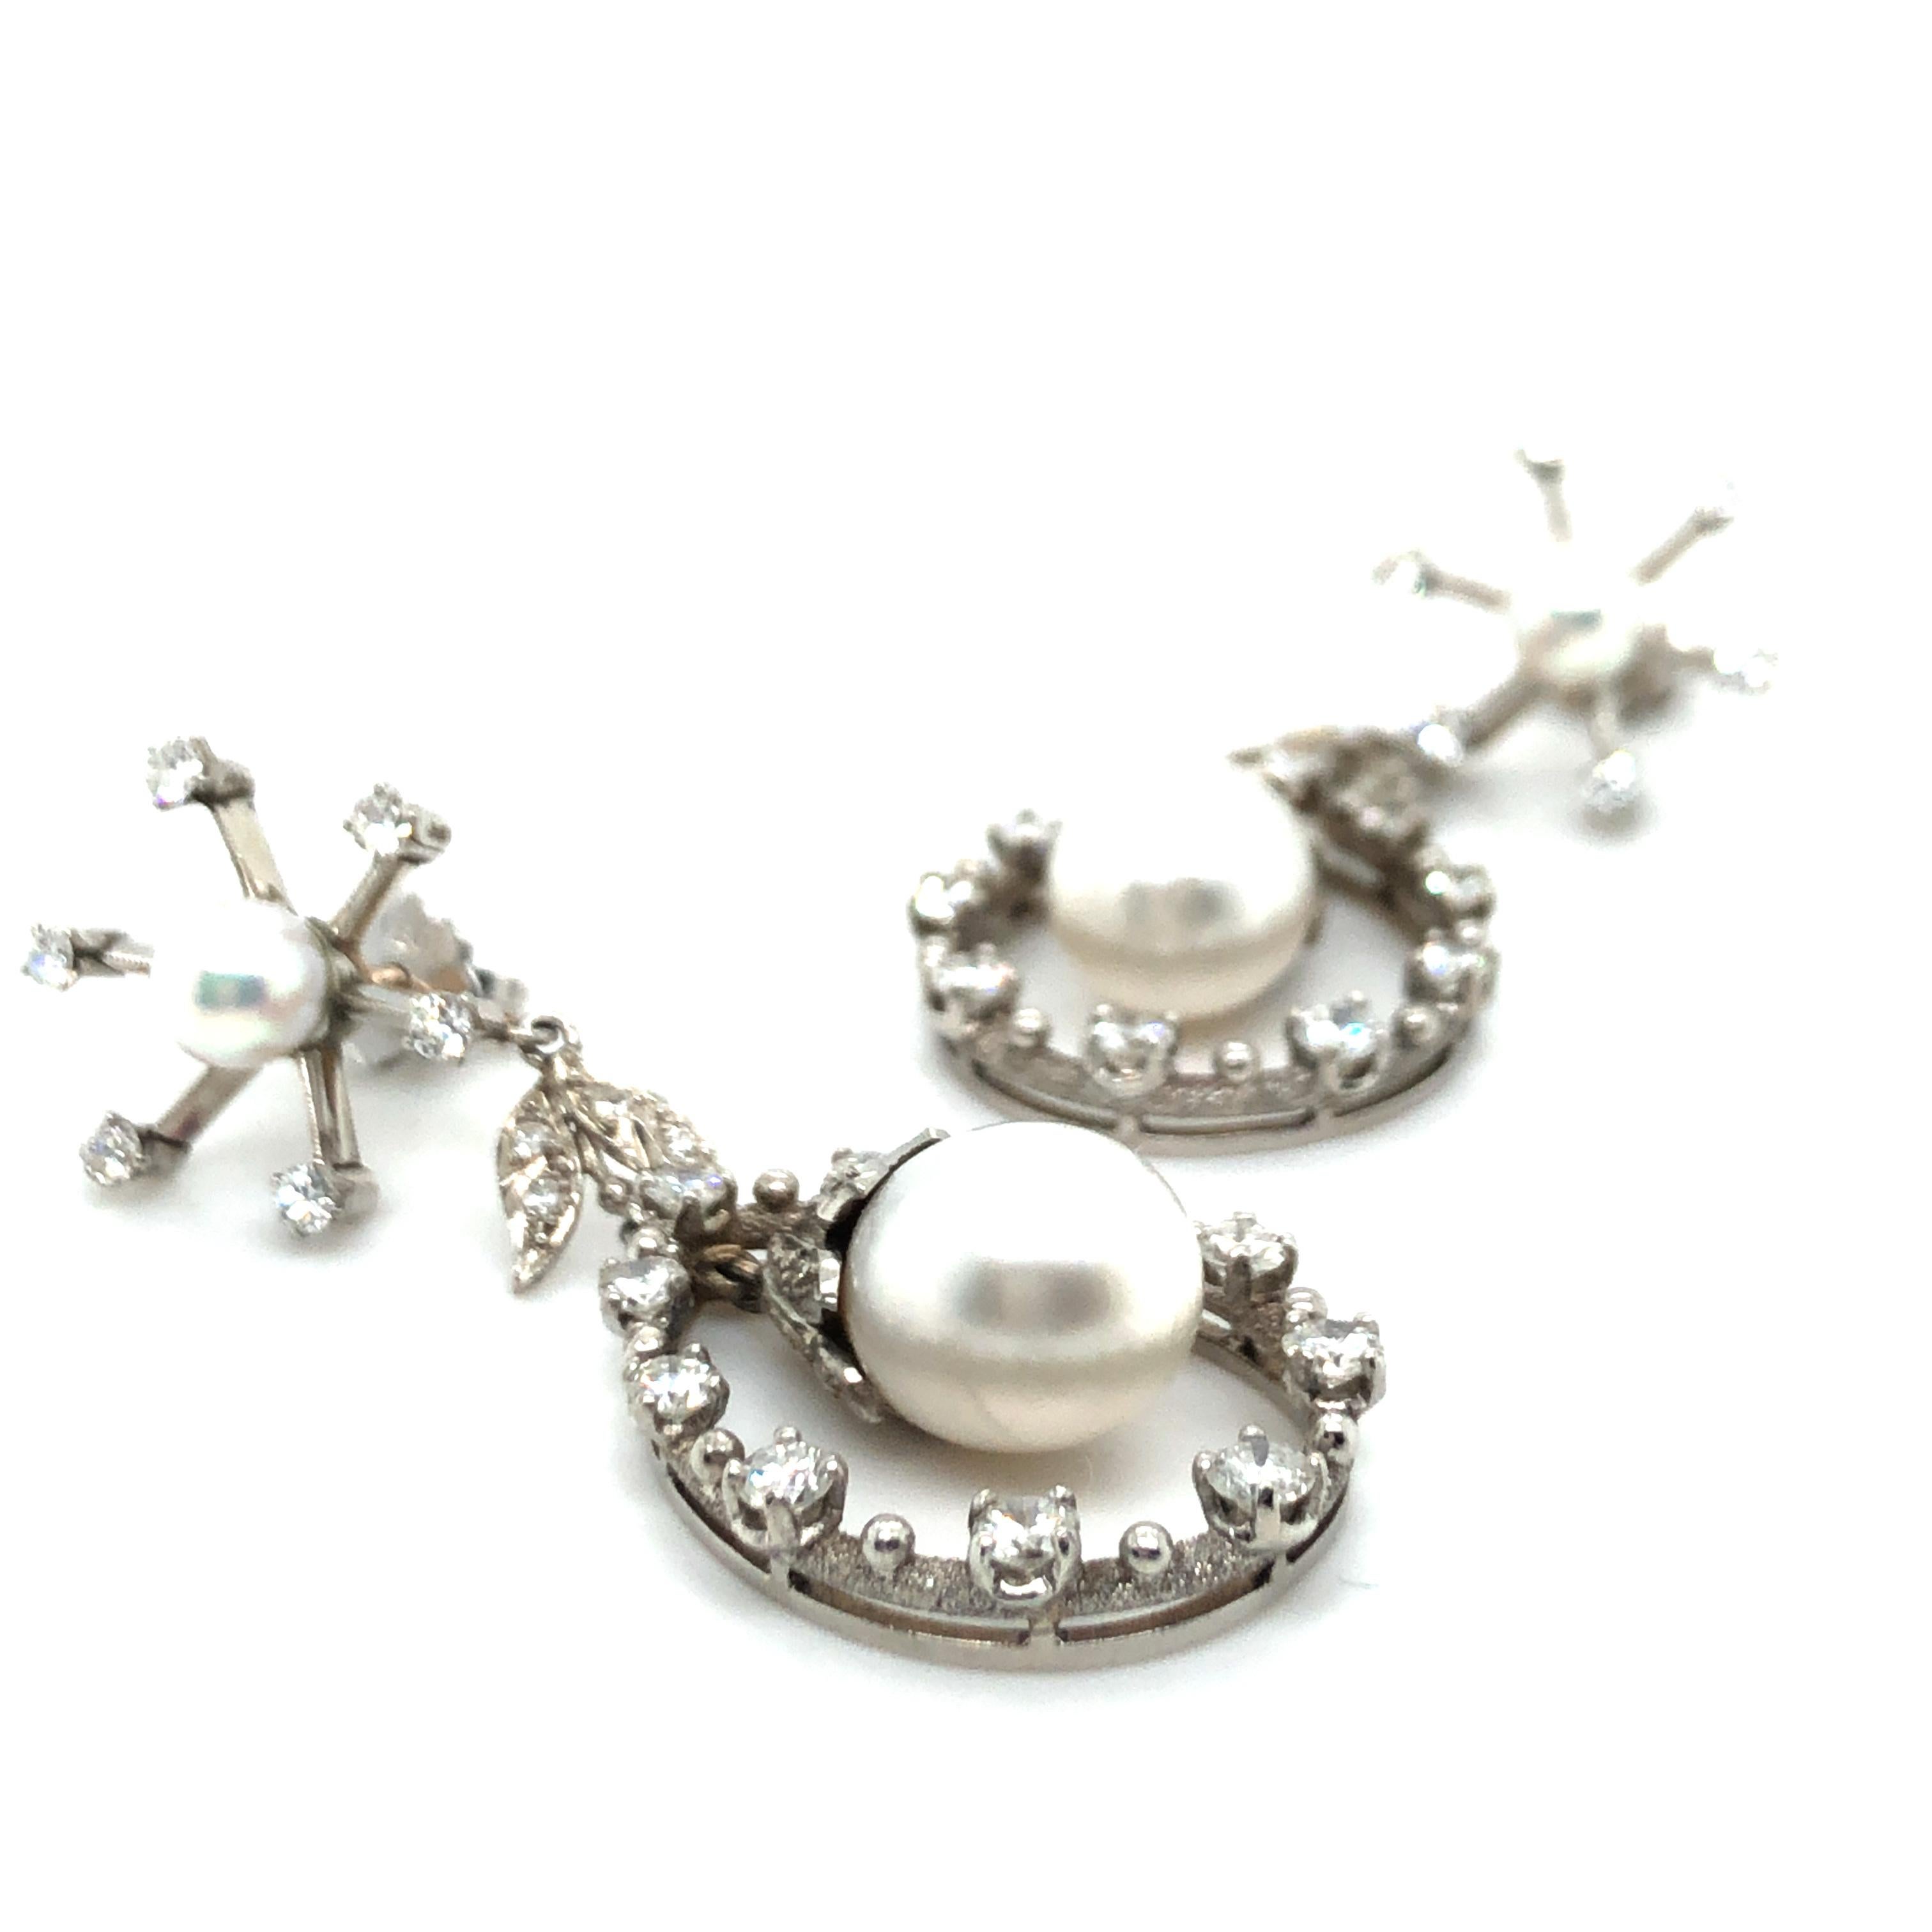 Chandelier Earrings with Diamonds and Akoya Pearls in 18k White Gold 4